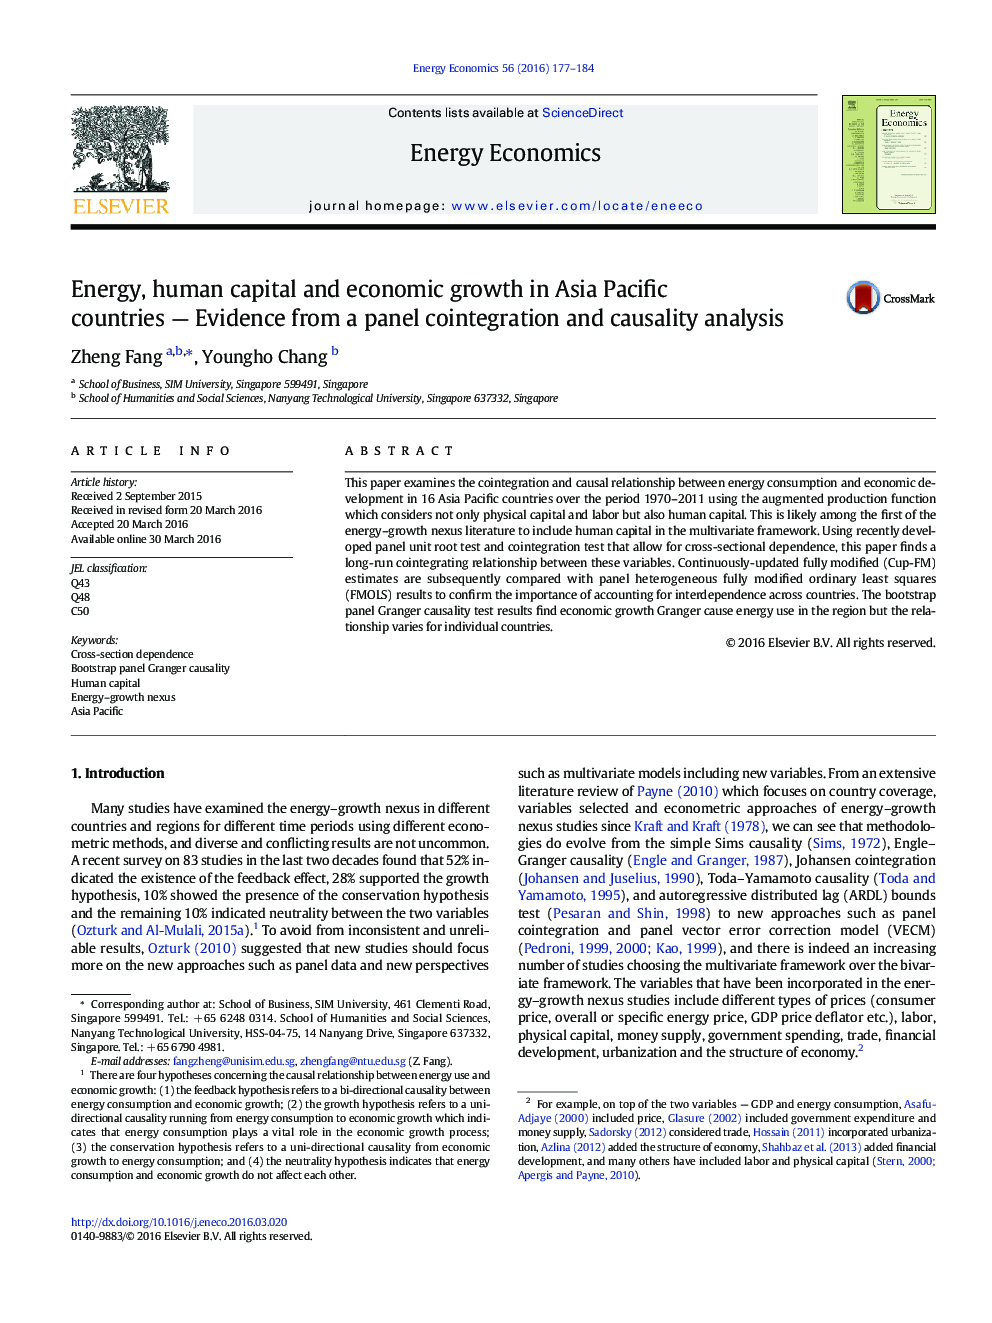 Energy, human capital and economic growth in Asia Pacific countries - Evidence from a panel cointegration and causality analysis